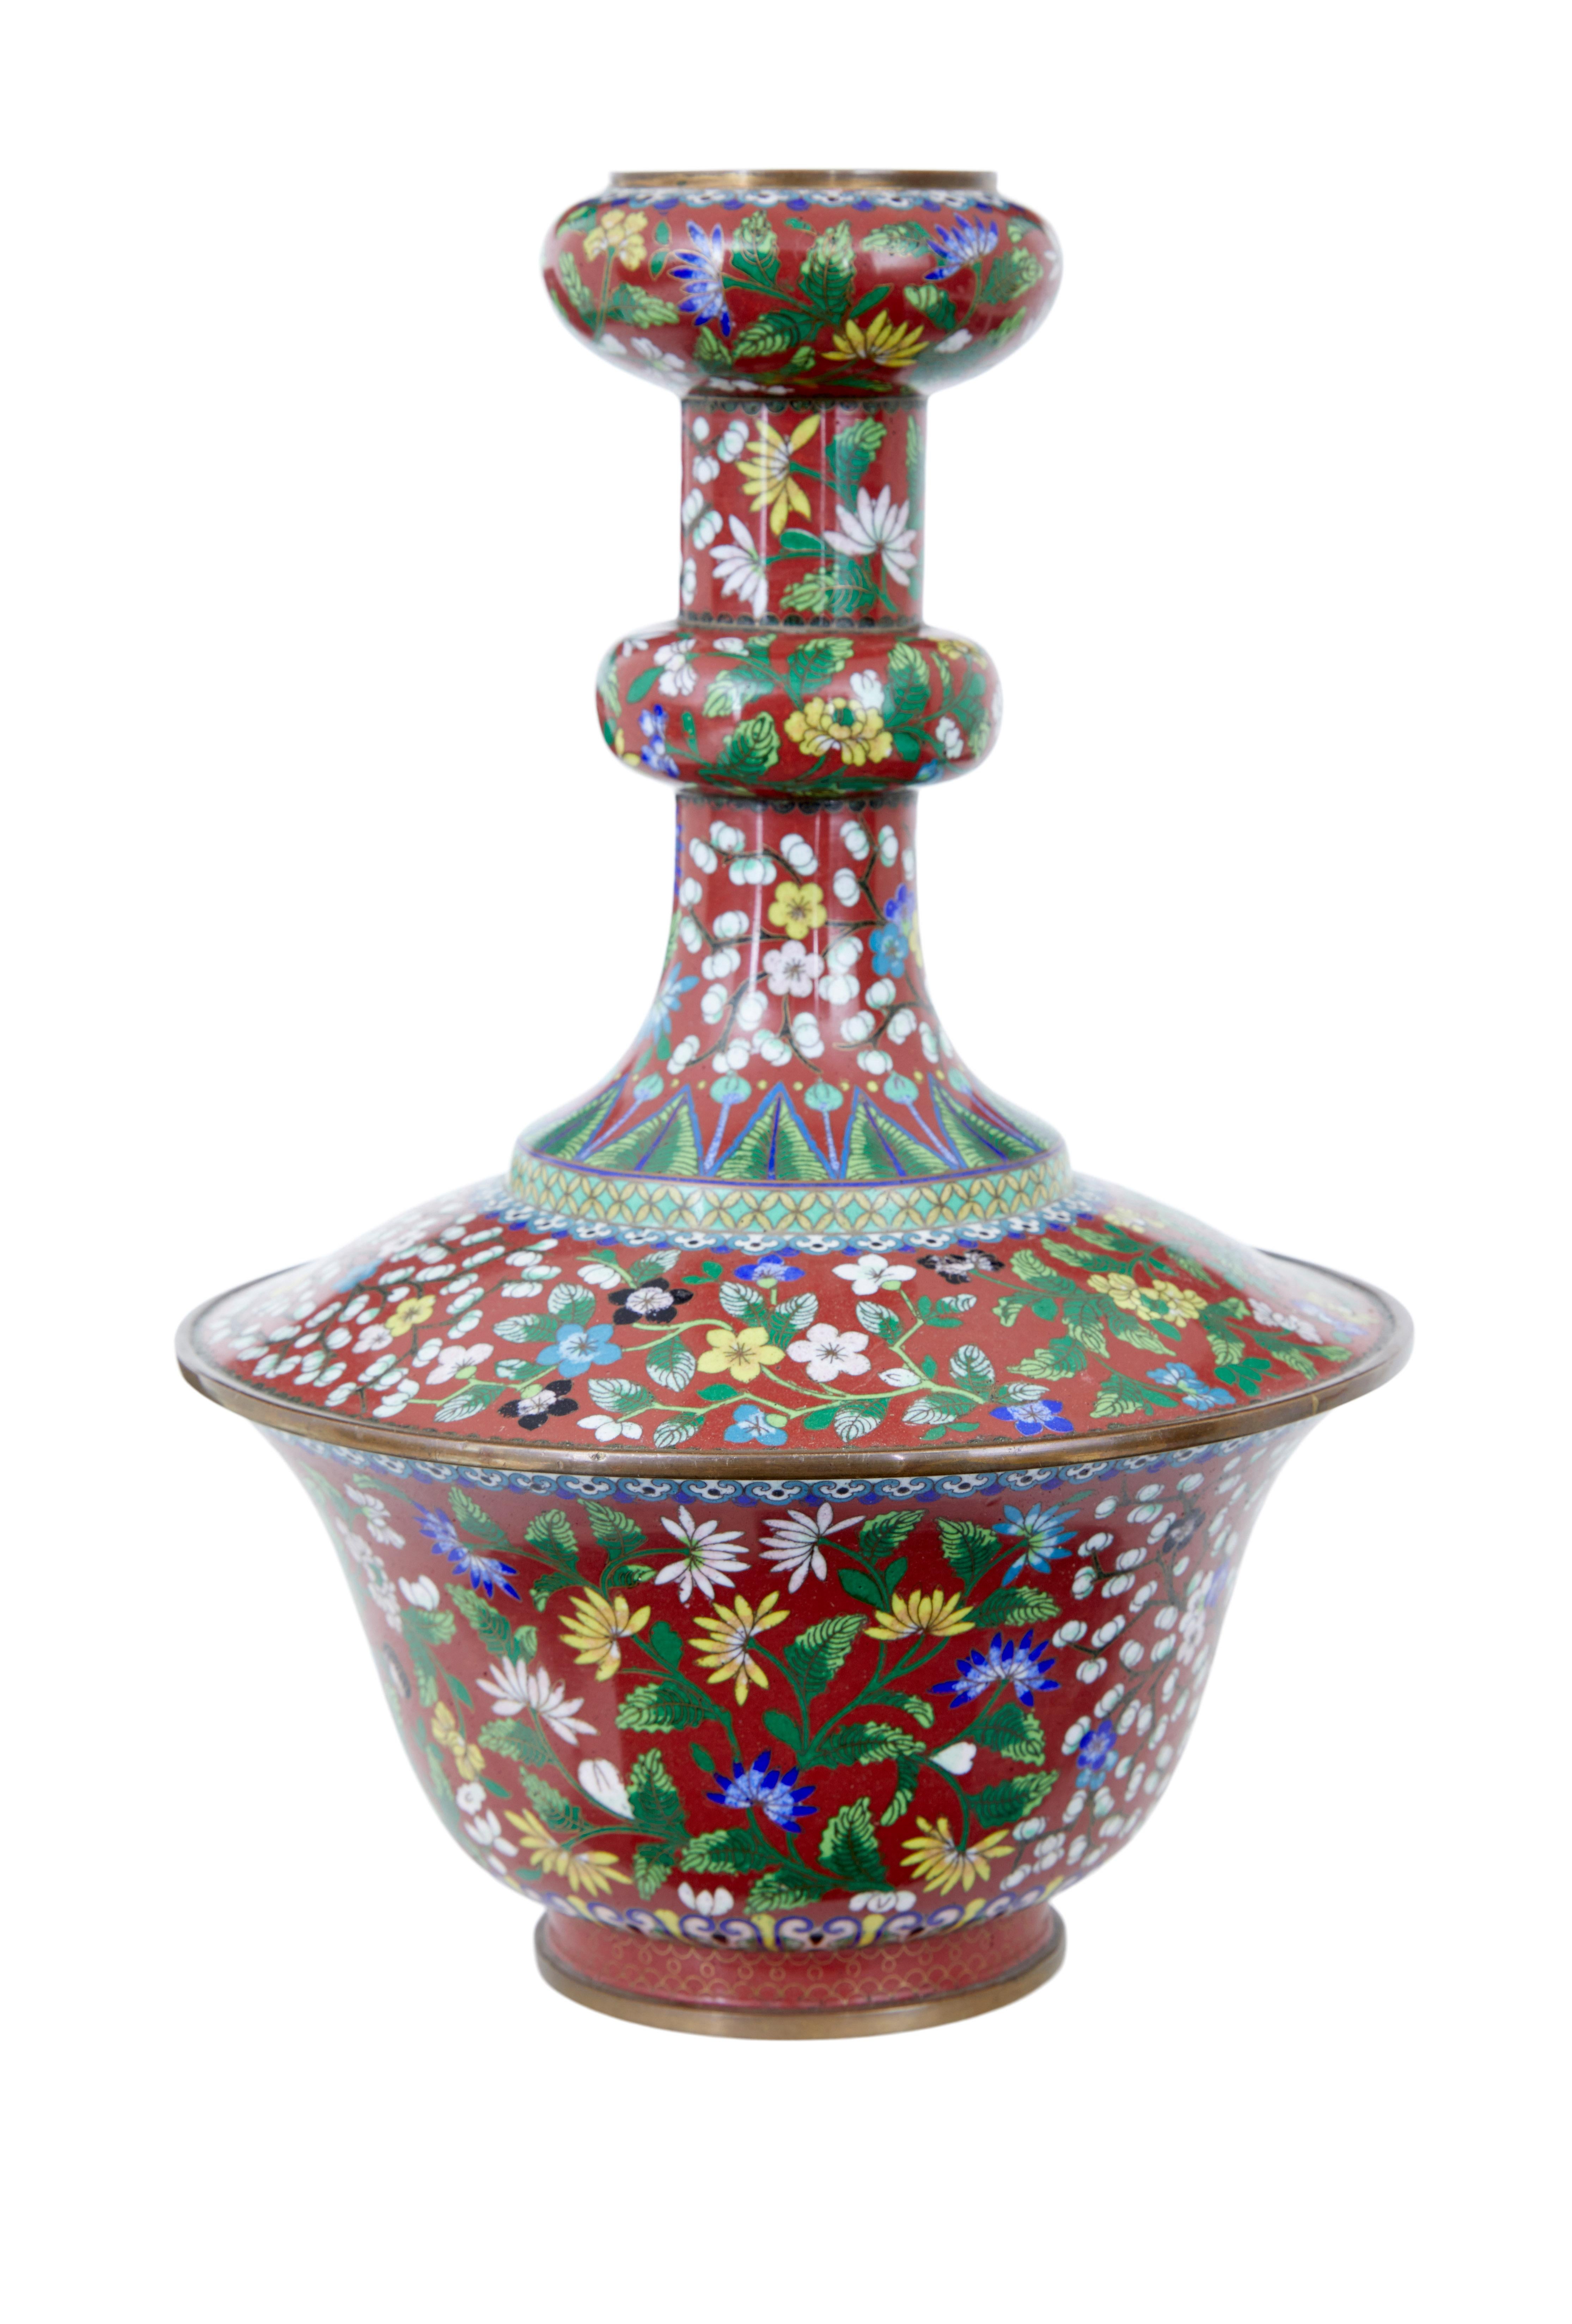 Early 20th century cloisonne enamel vase circa 1920.

Decorative Chinese piece of cloisonne.  Decorated with reds, whites, greens and blues around a brass spun main frame.

Missing the lid/stopper, but a lovely decorative item.